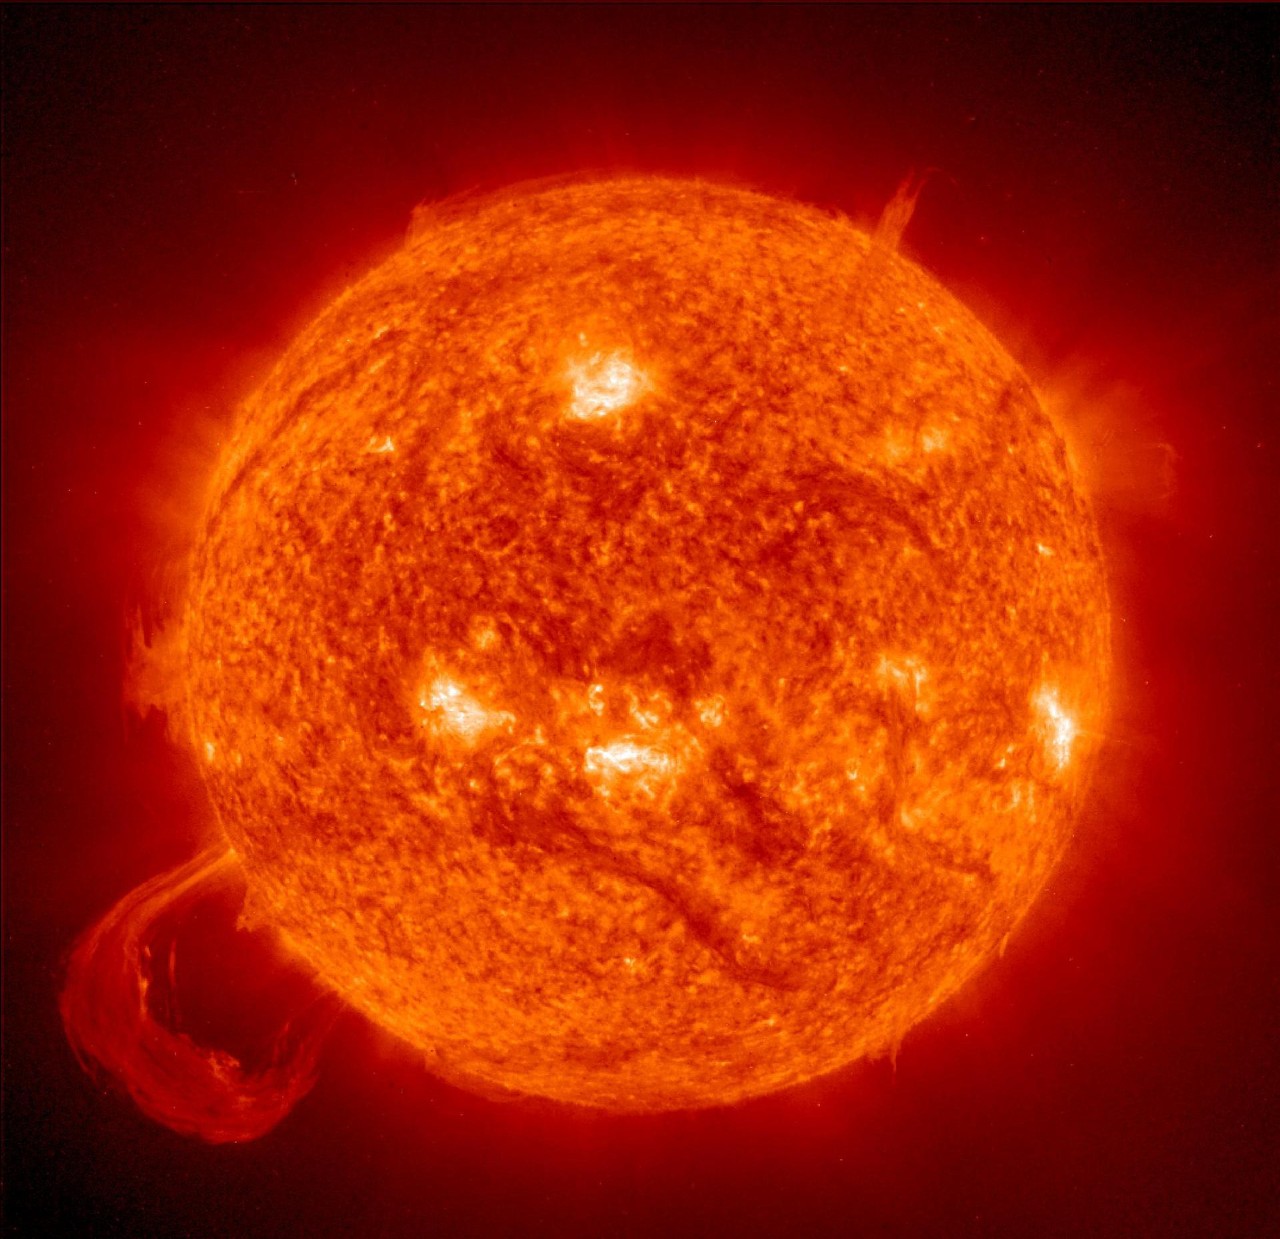 The European Space Agency's SOHO spacecraft captured this image of the sun in 1999 using NASA's Extreme Ultraviolet Imaging Telescope. ESA/NASA/SOHO